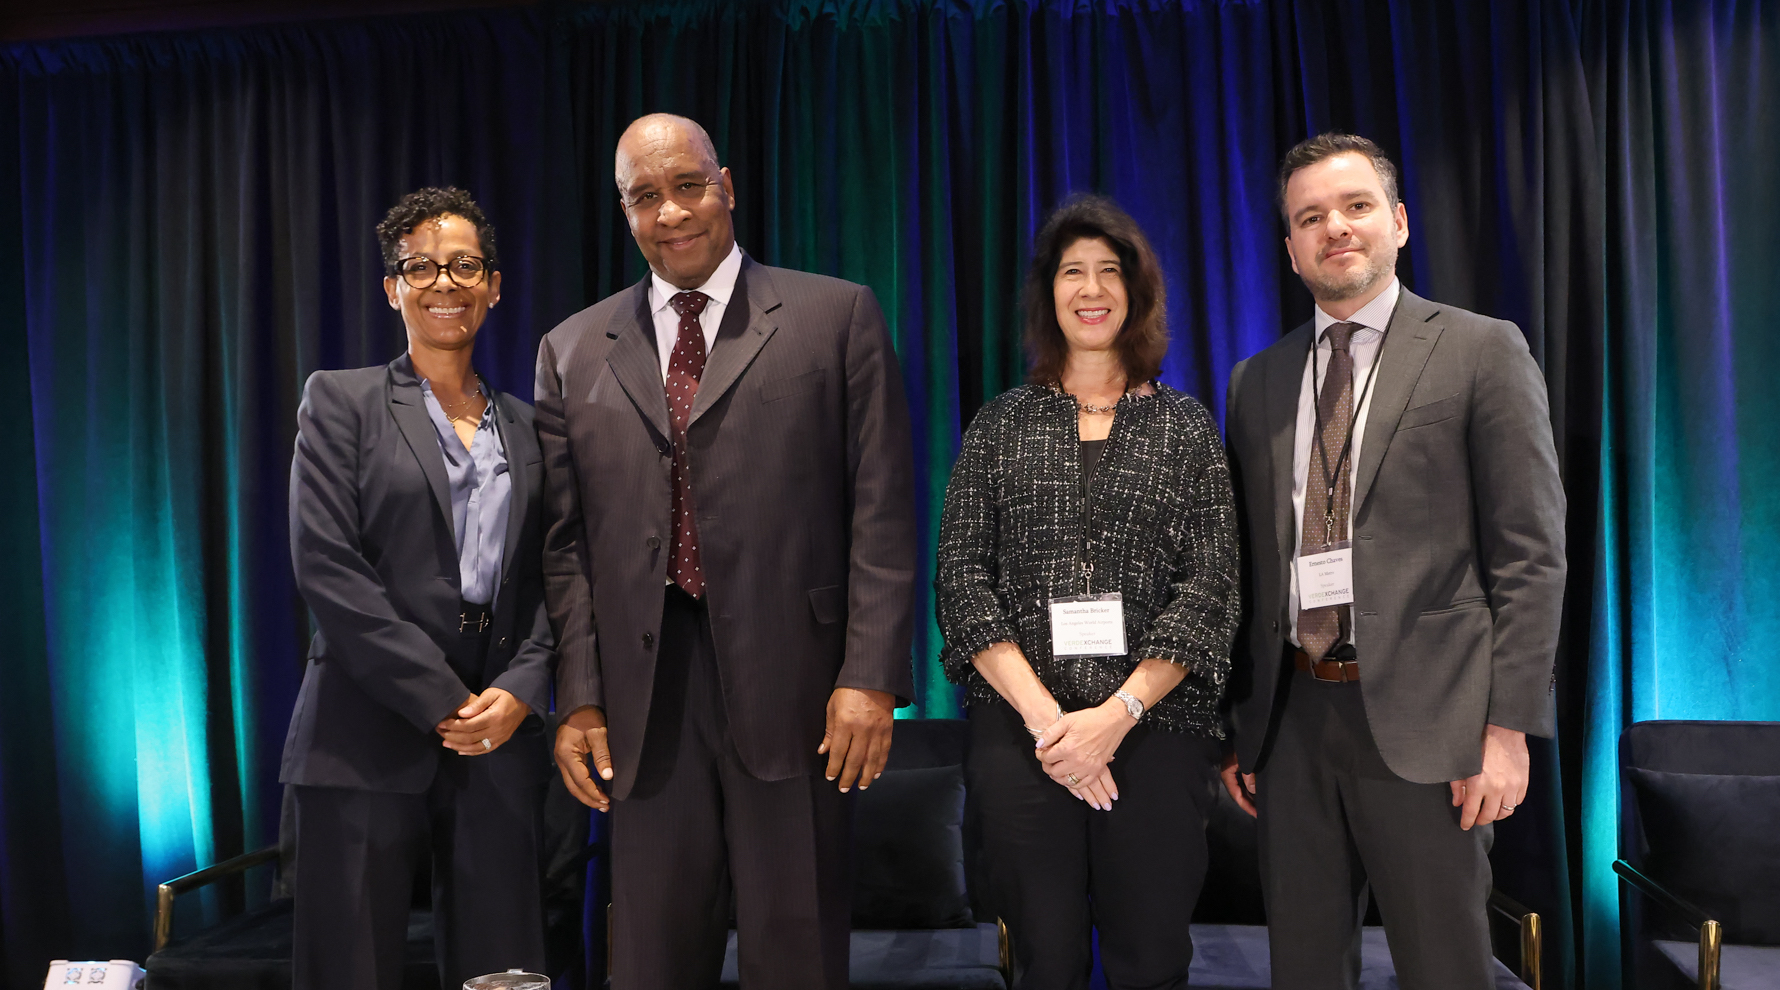 Renata Simril, James T. Butts, Samantha Bricker and Ernesto Chaves on stage after the Monday Plenary